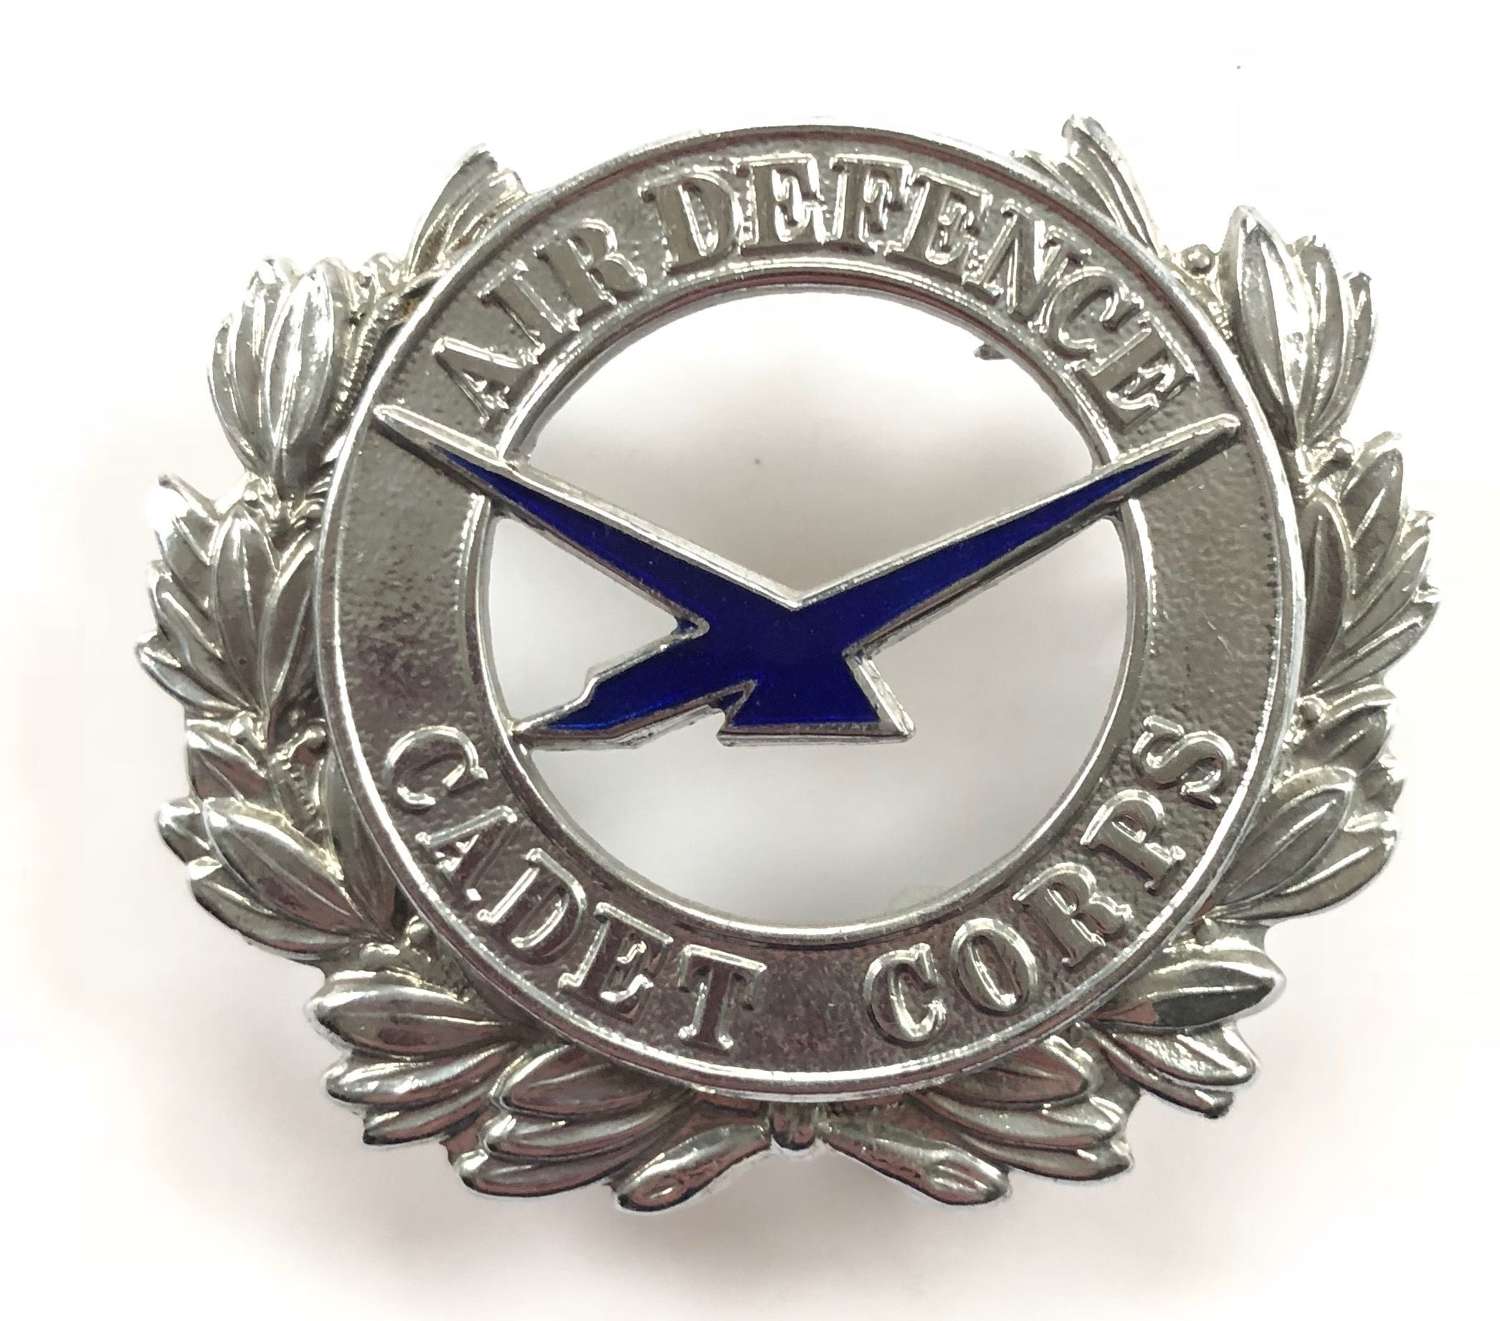 Air Defence Cadet Corps Officer’s cap badge circa 1938-41.